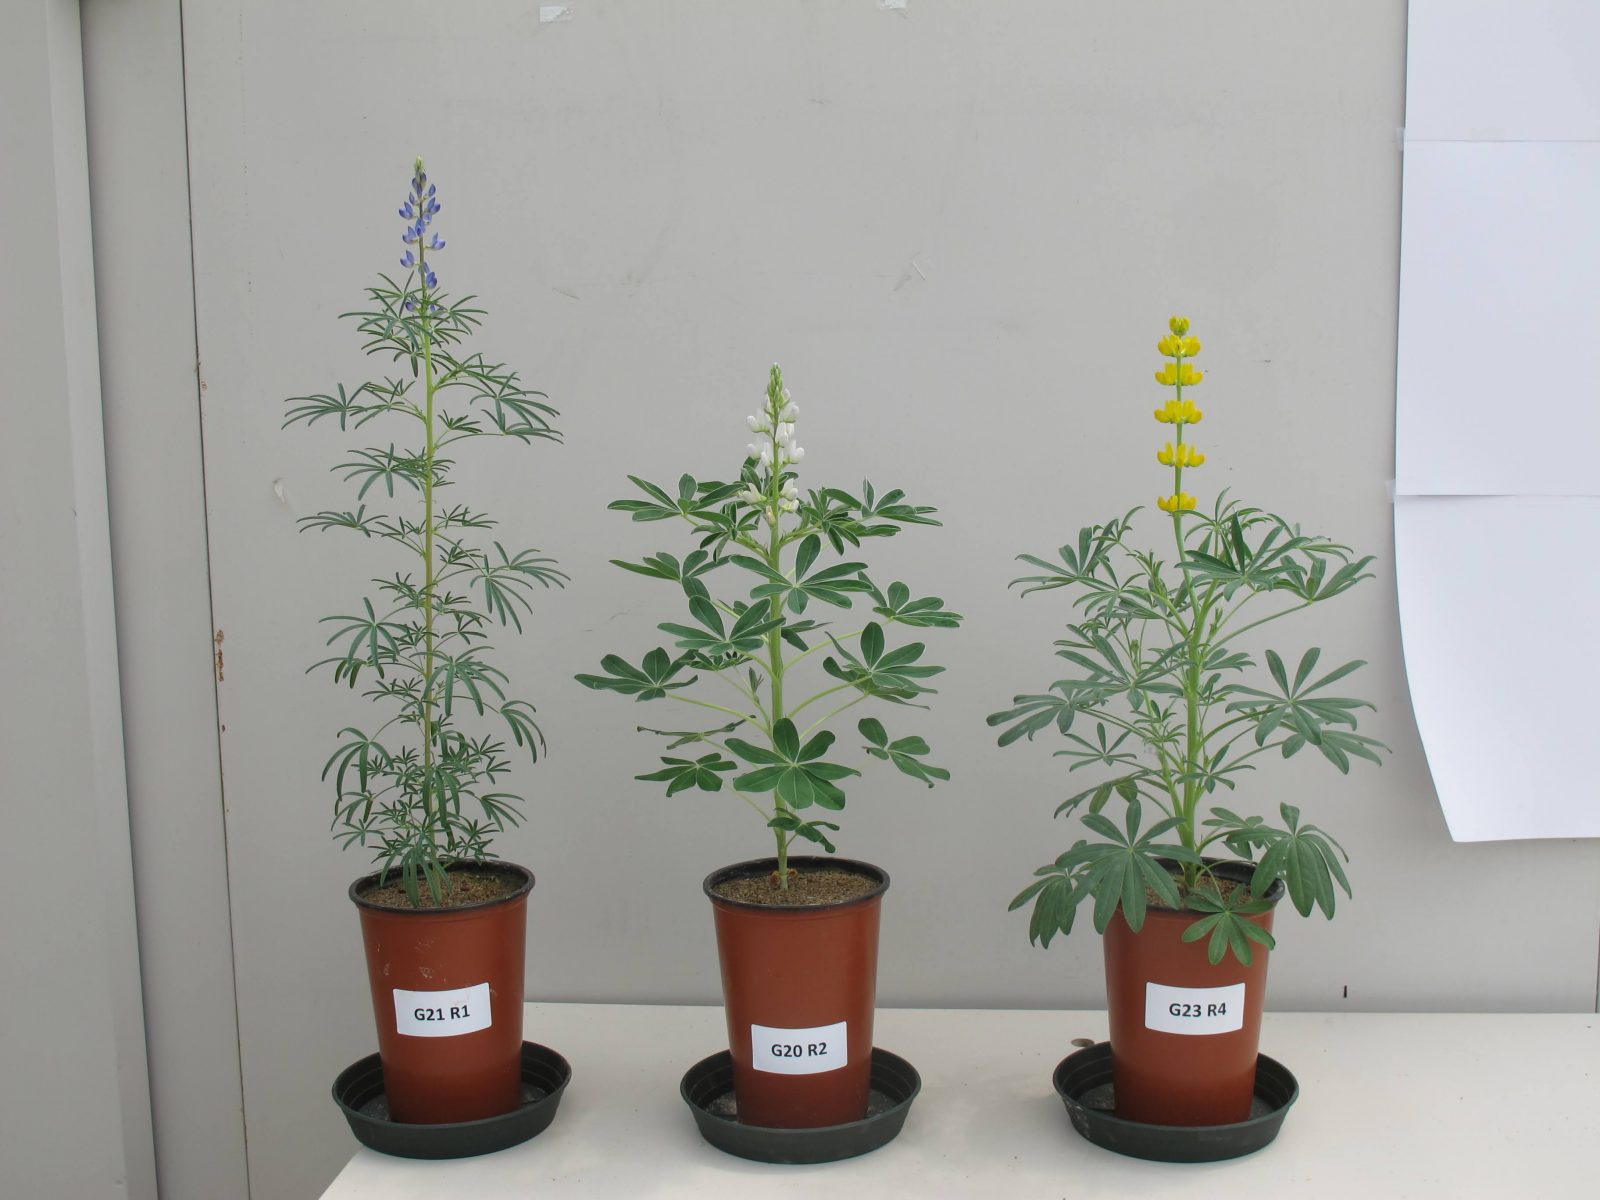 Lupin-Narrow-leafed-white-and-yellow-lupins-in-greenhouse-trial-©NicolasCarton-@Lumineuses_div